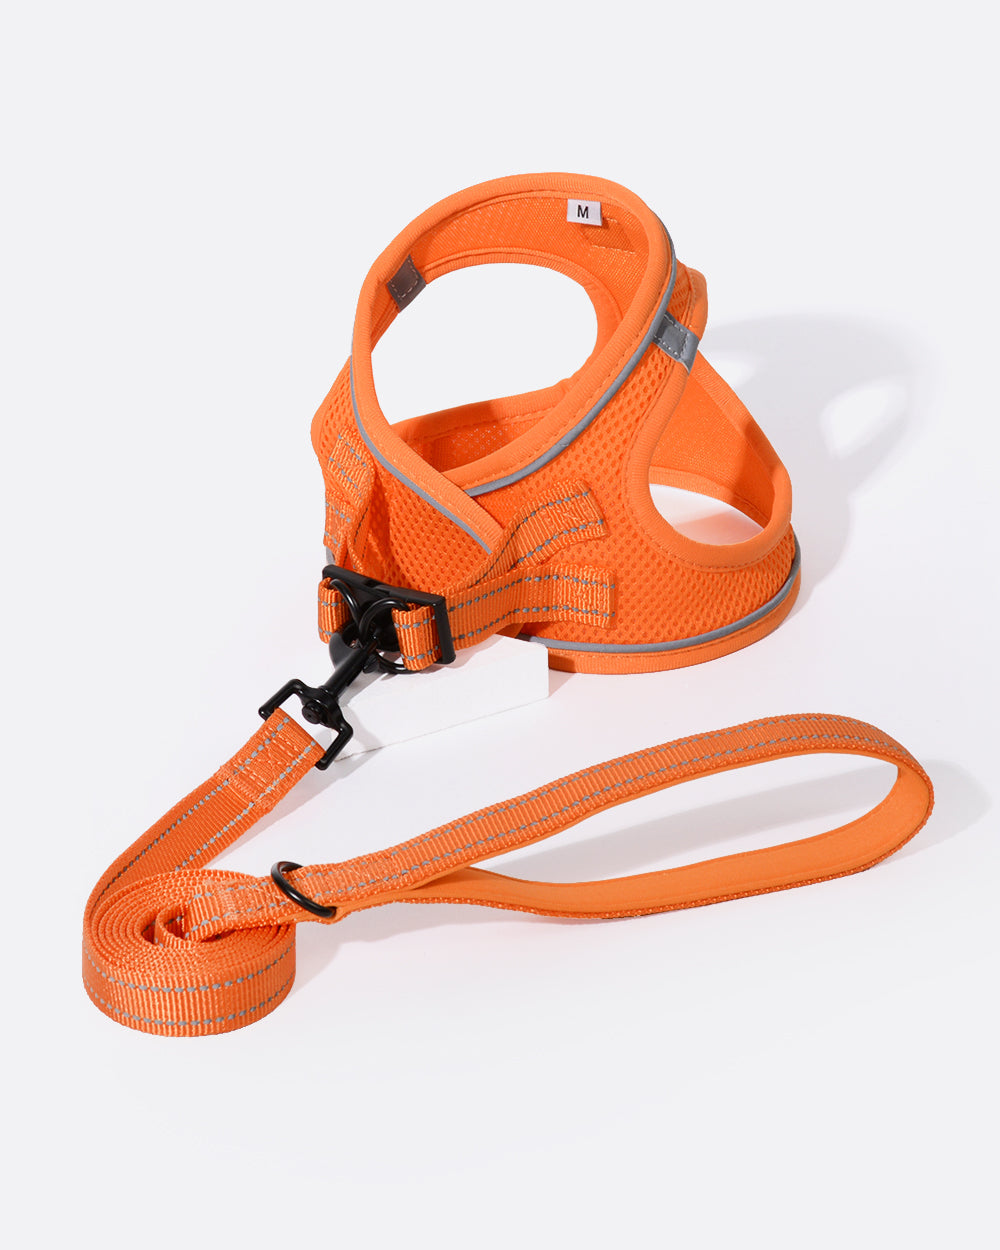 OxyMesh Step-in Harness and Leash Set - Neon Orange